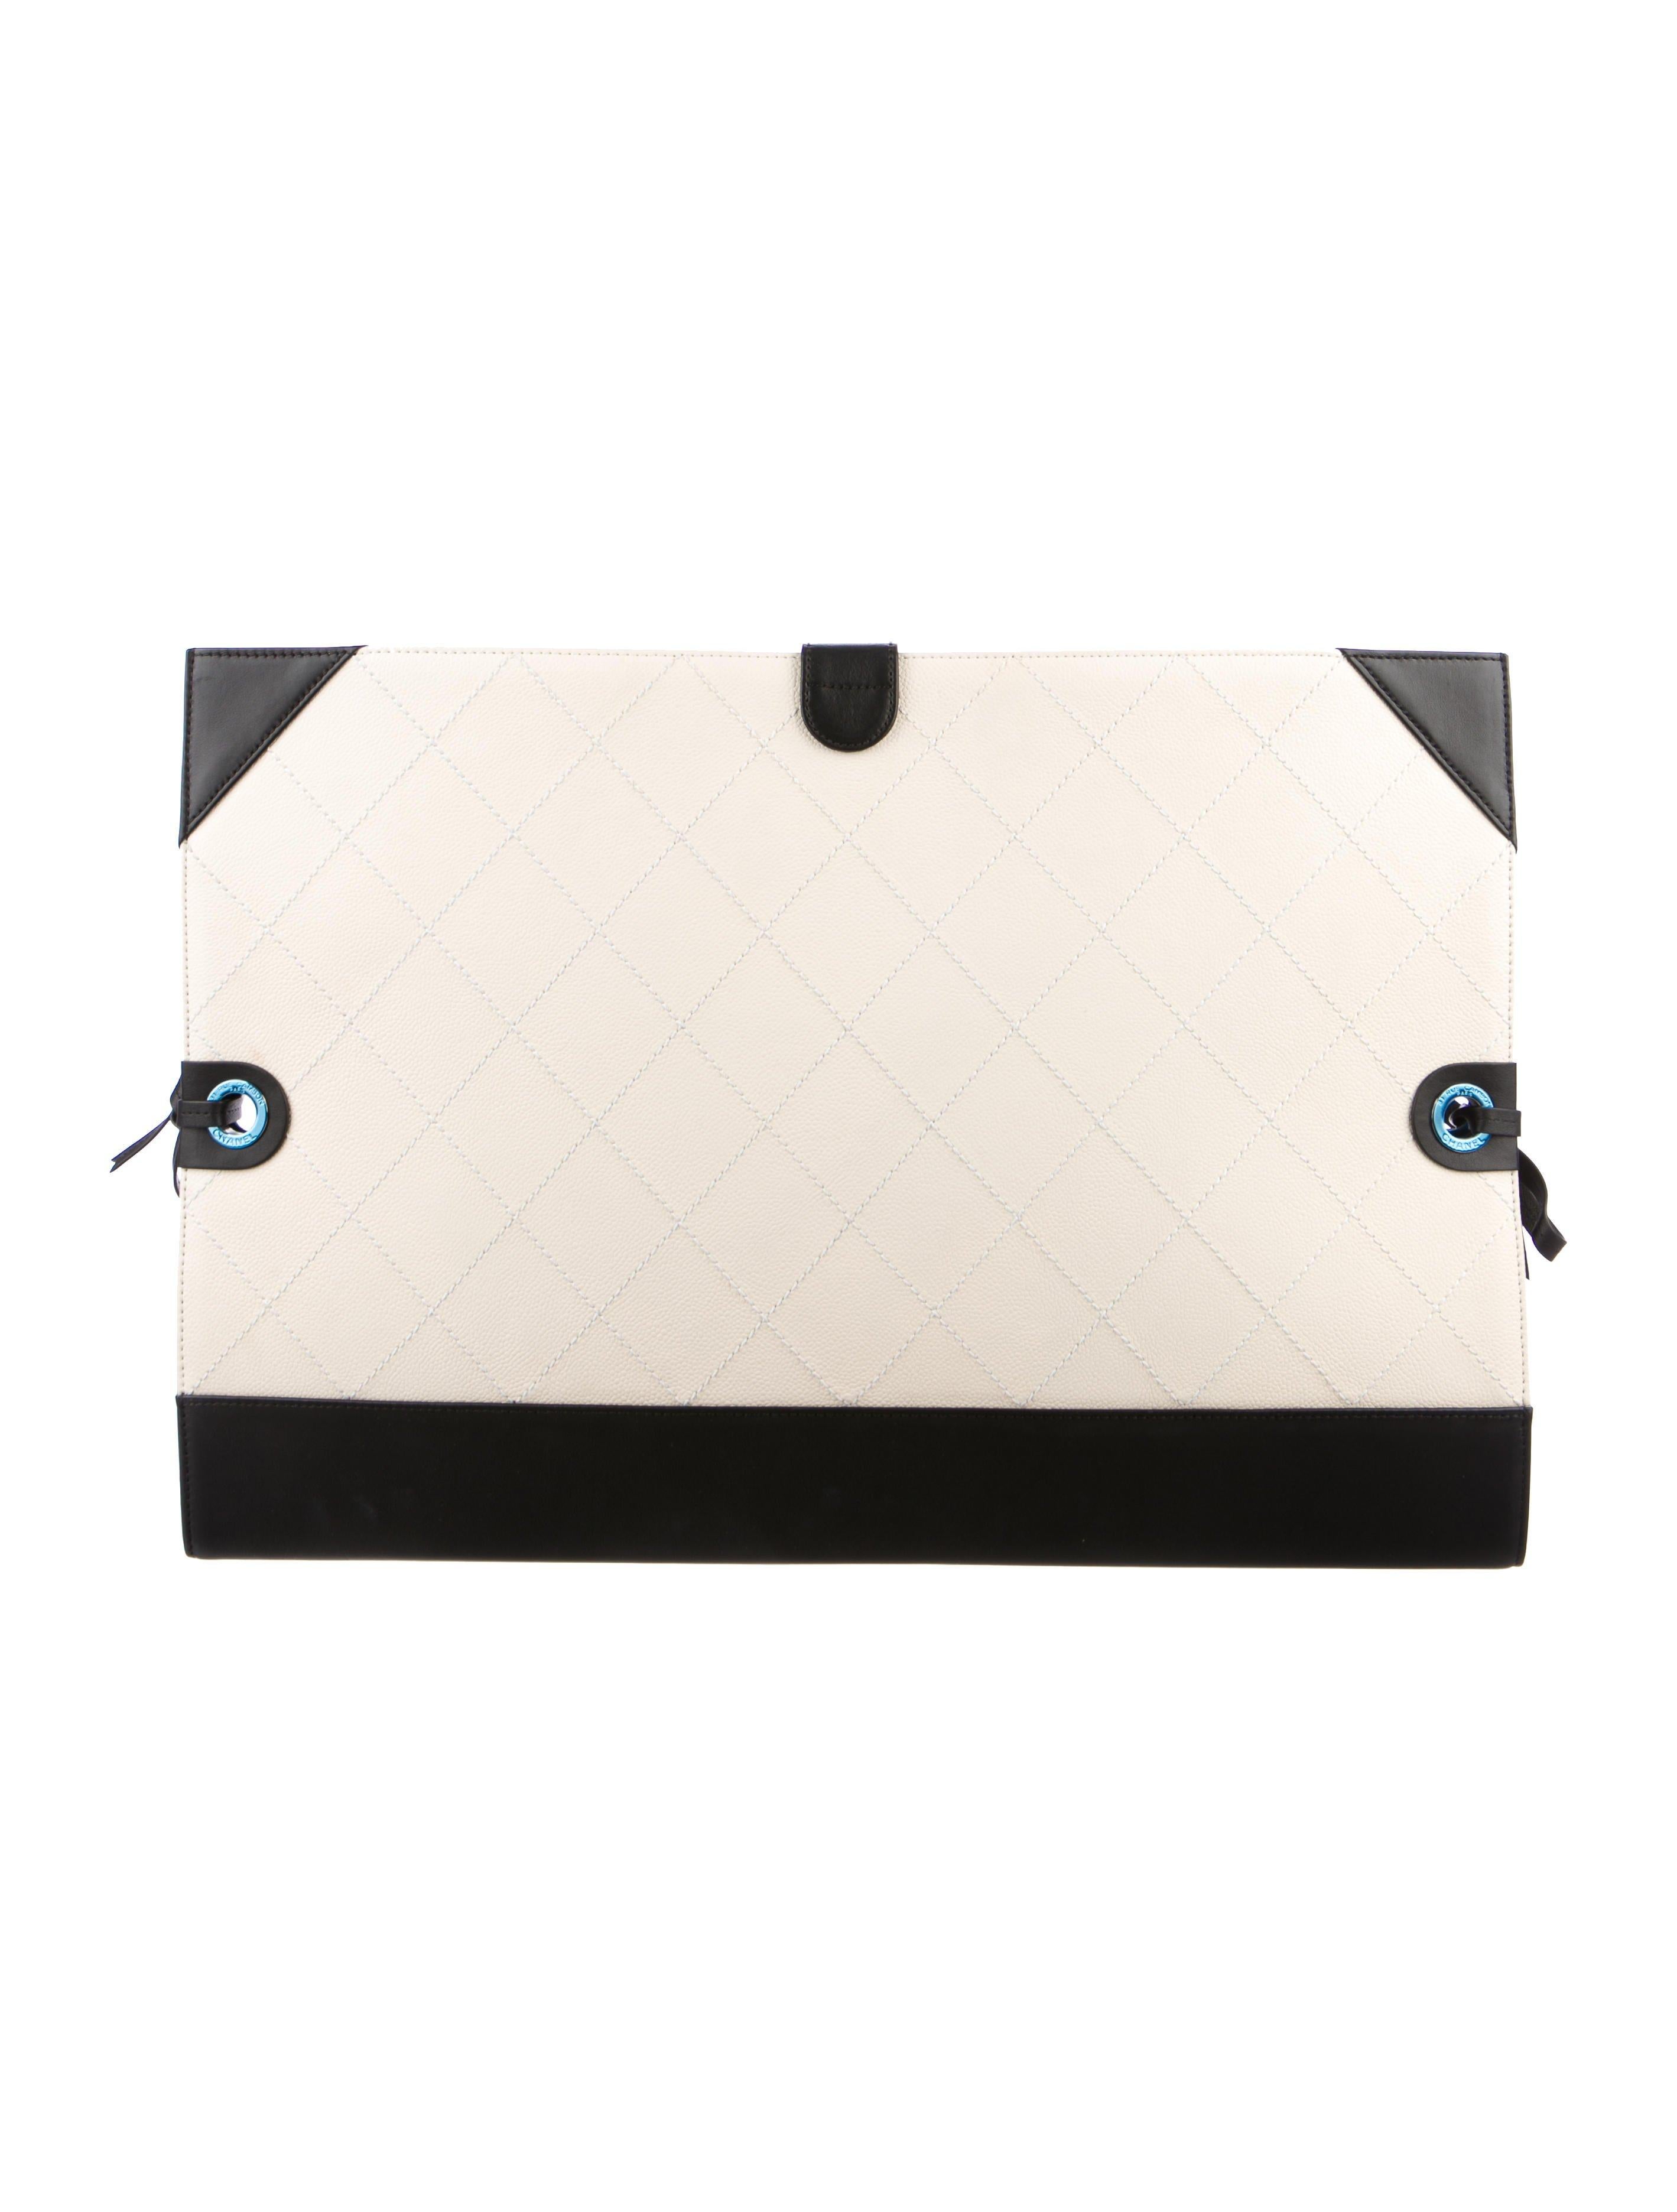 Women's or Men's Chanel Black White Leather Spring RTW Runway Professional Portfolio Clutch For Sale